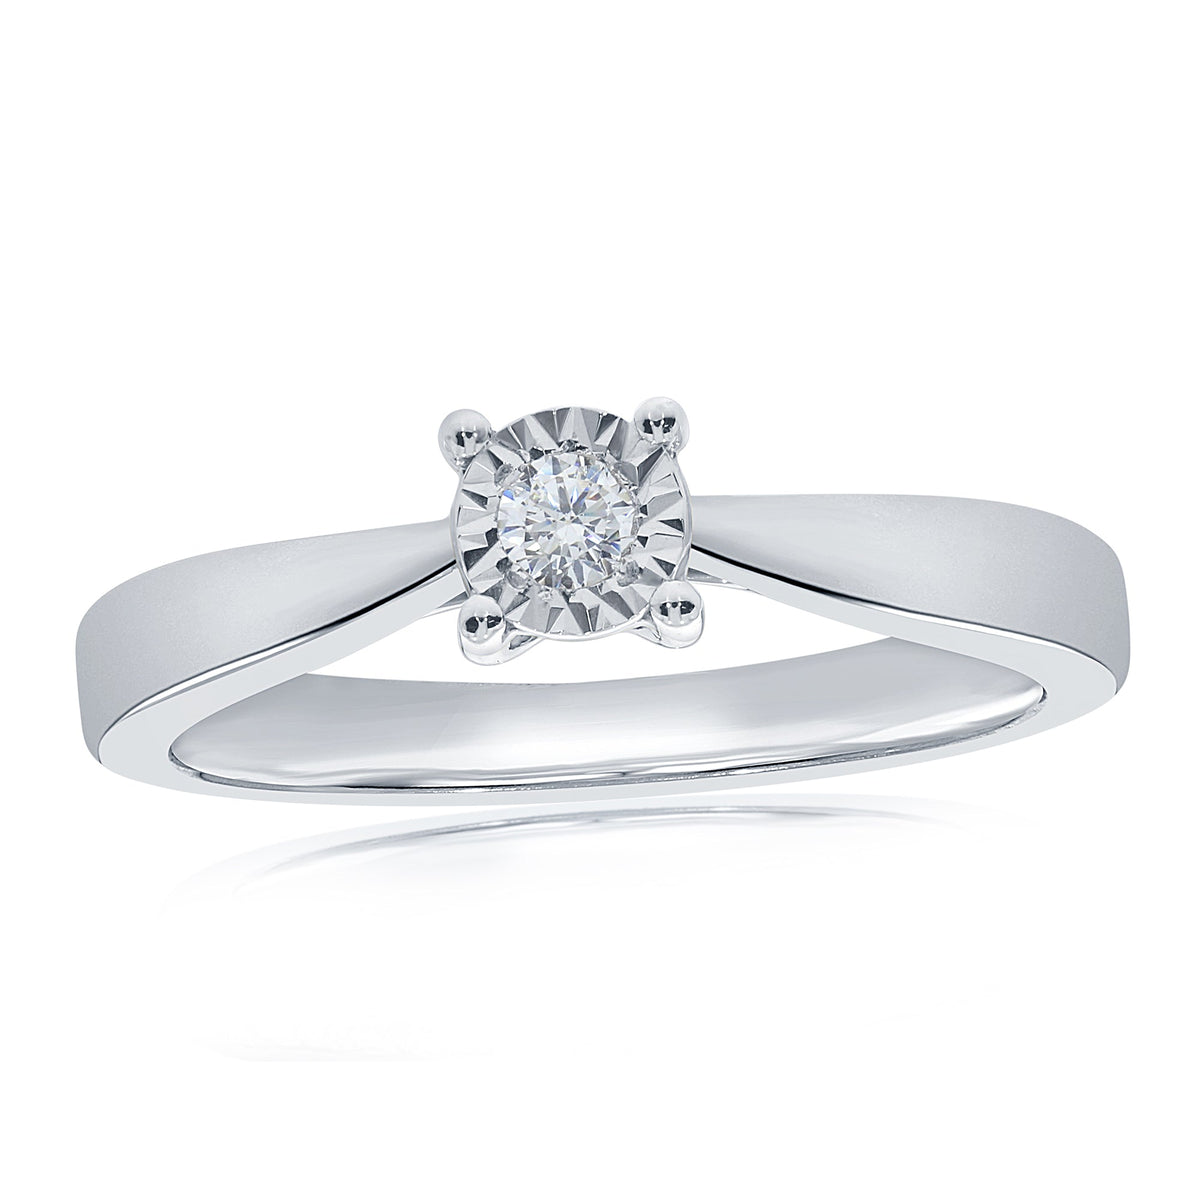 9ct white gold single stone miracle plate diamond ring 0.10ct